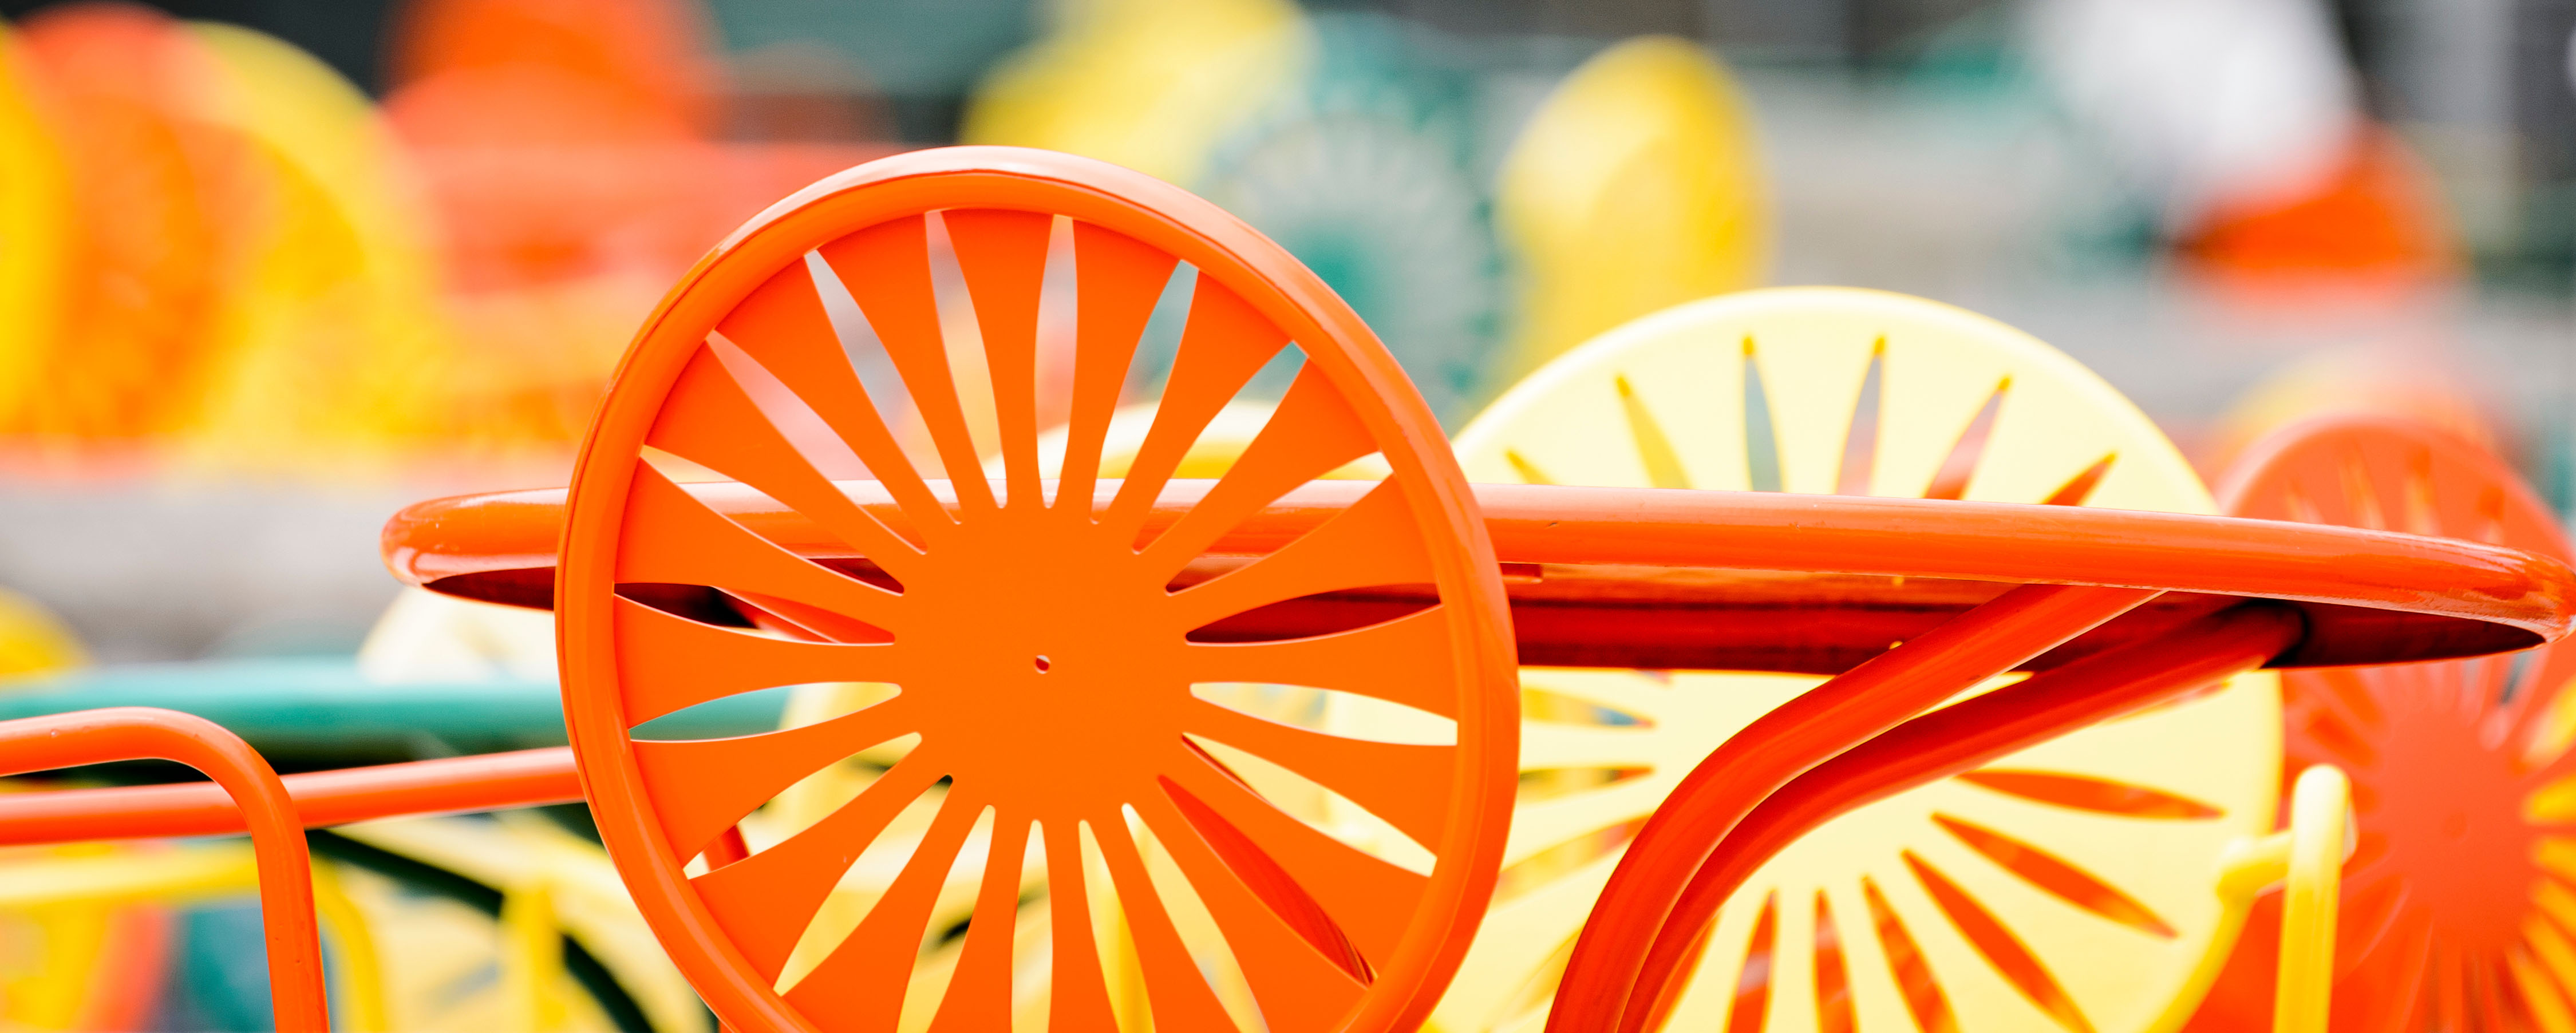 Chairs featuring an iconic sunburst pattern populate the Memorial Union Terrace at the University of Wisconsin-Madison.